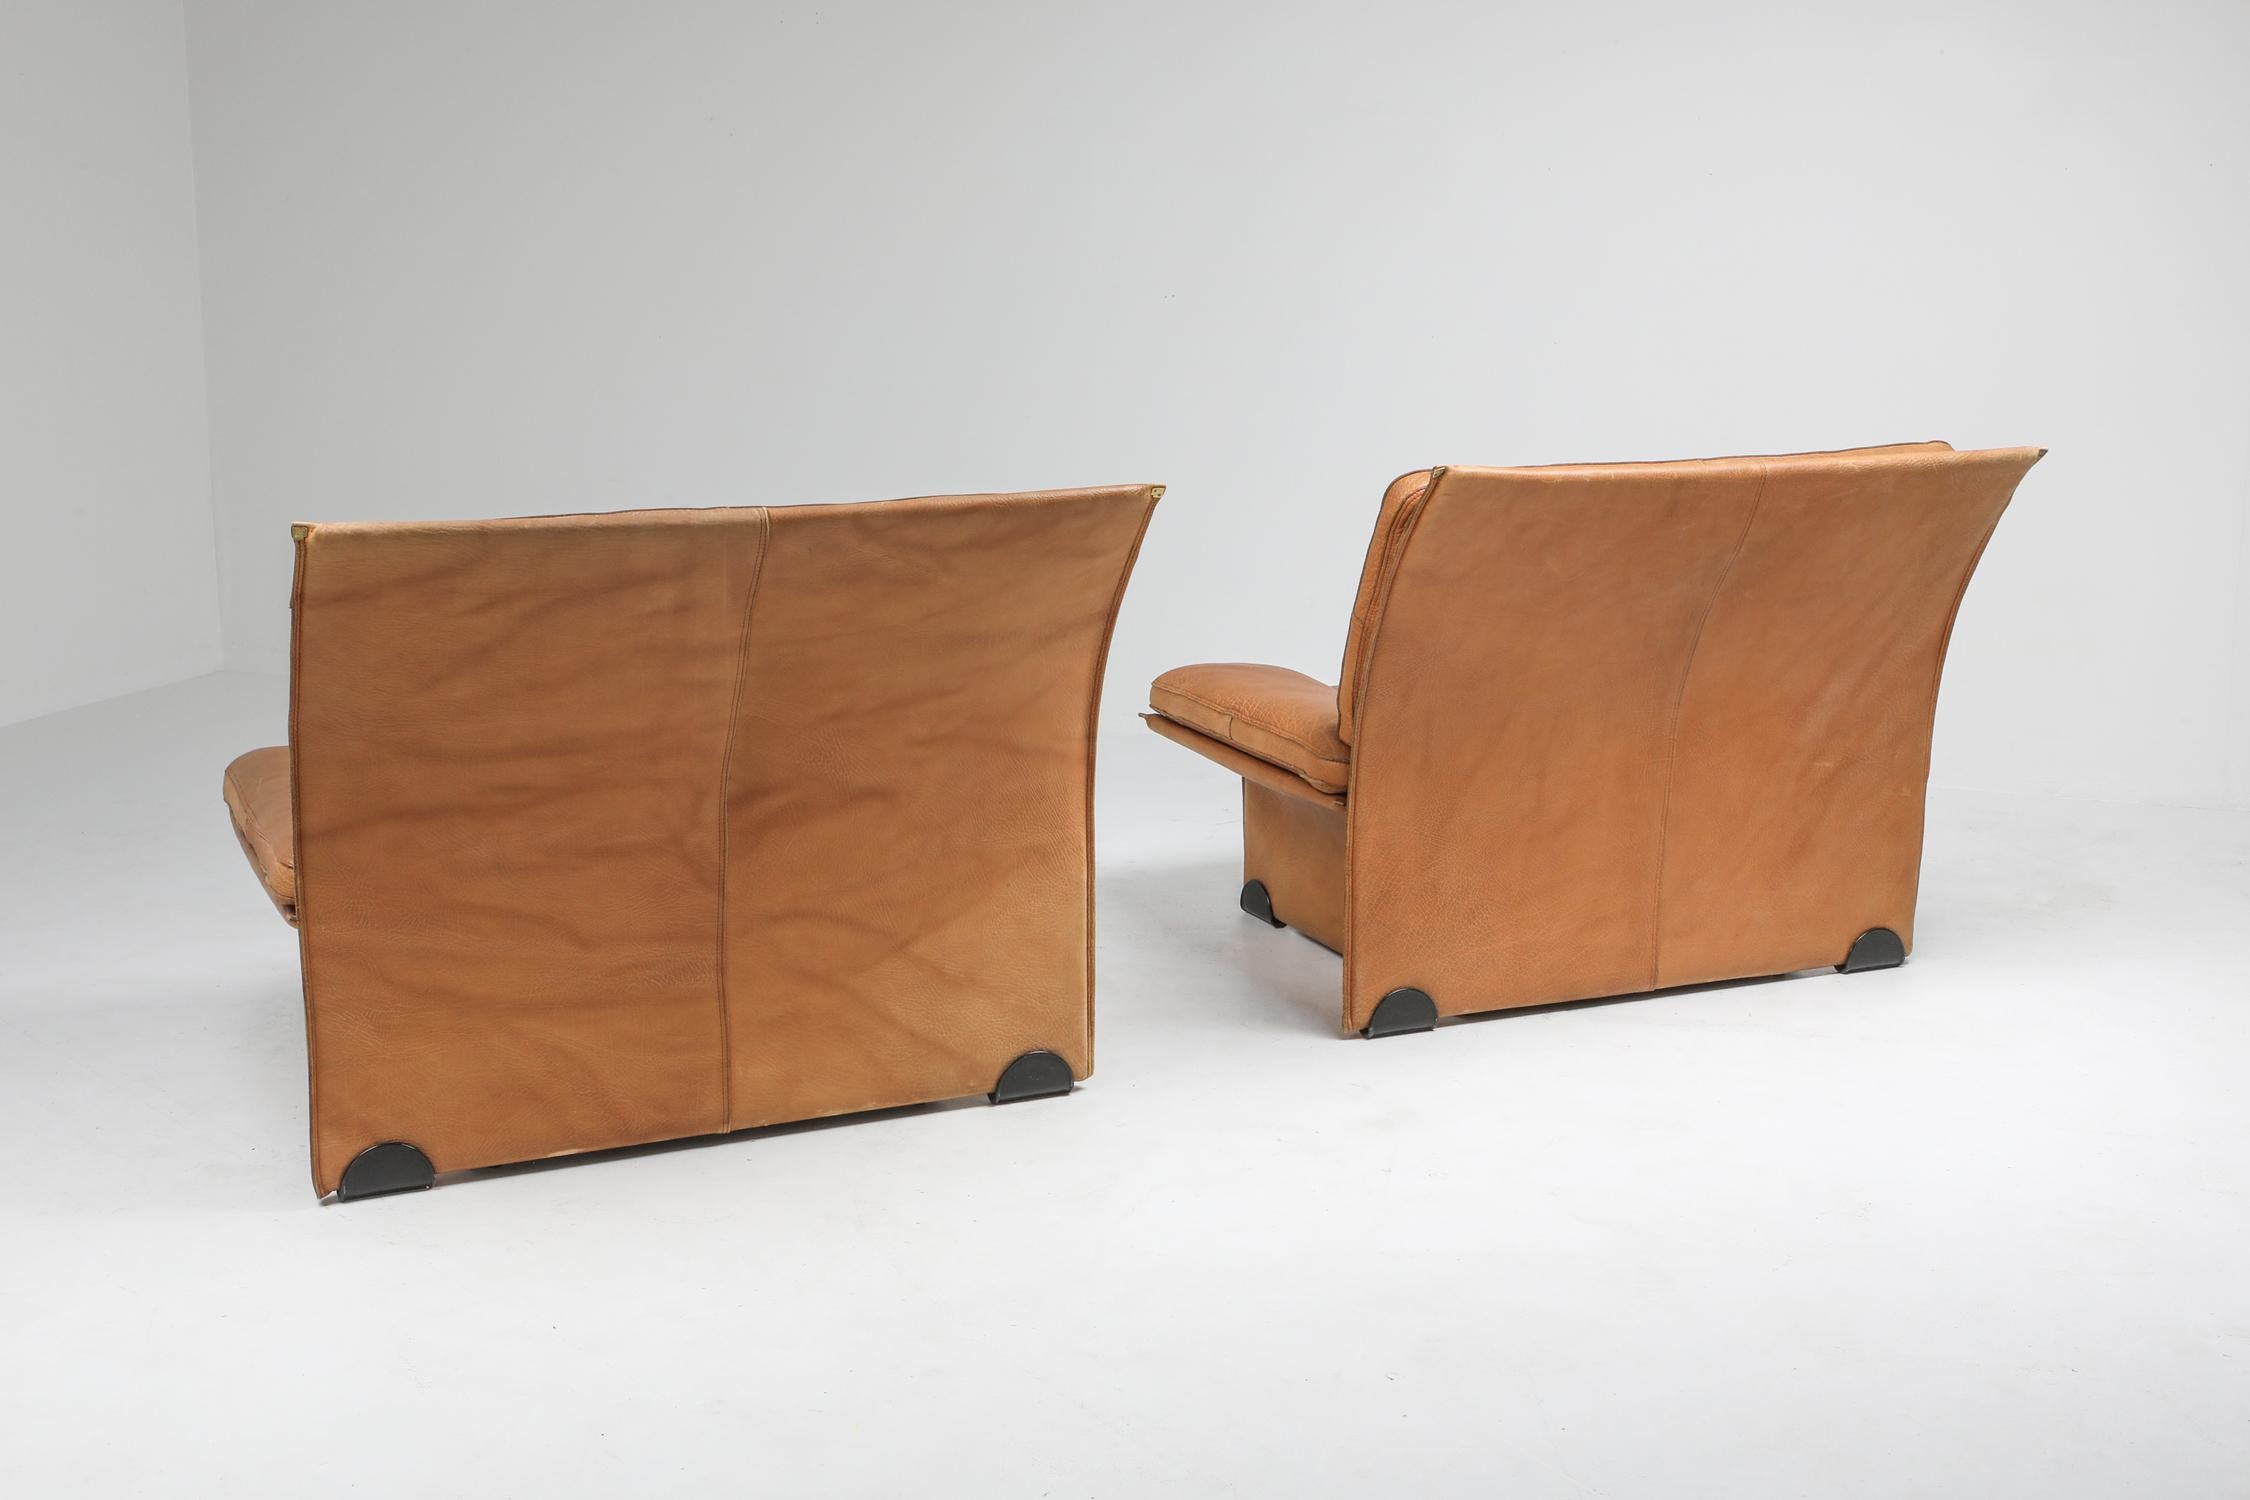 European Mid-Century Modern Thick Camel Leather Club Chairs by Brunati, Italy